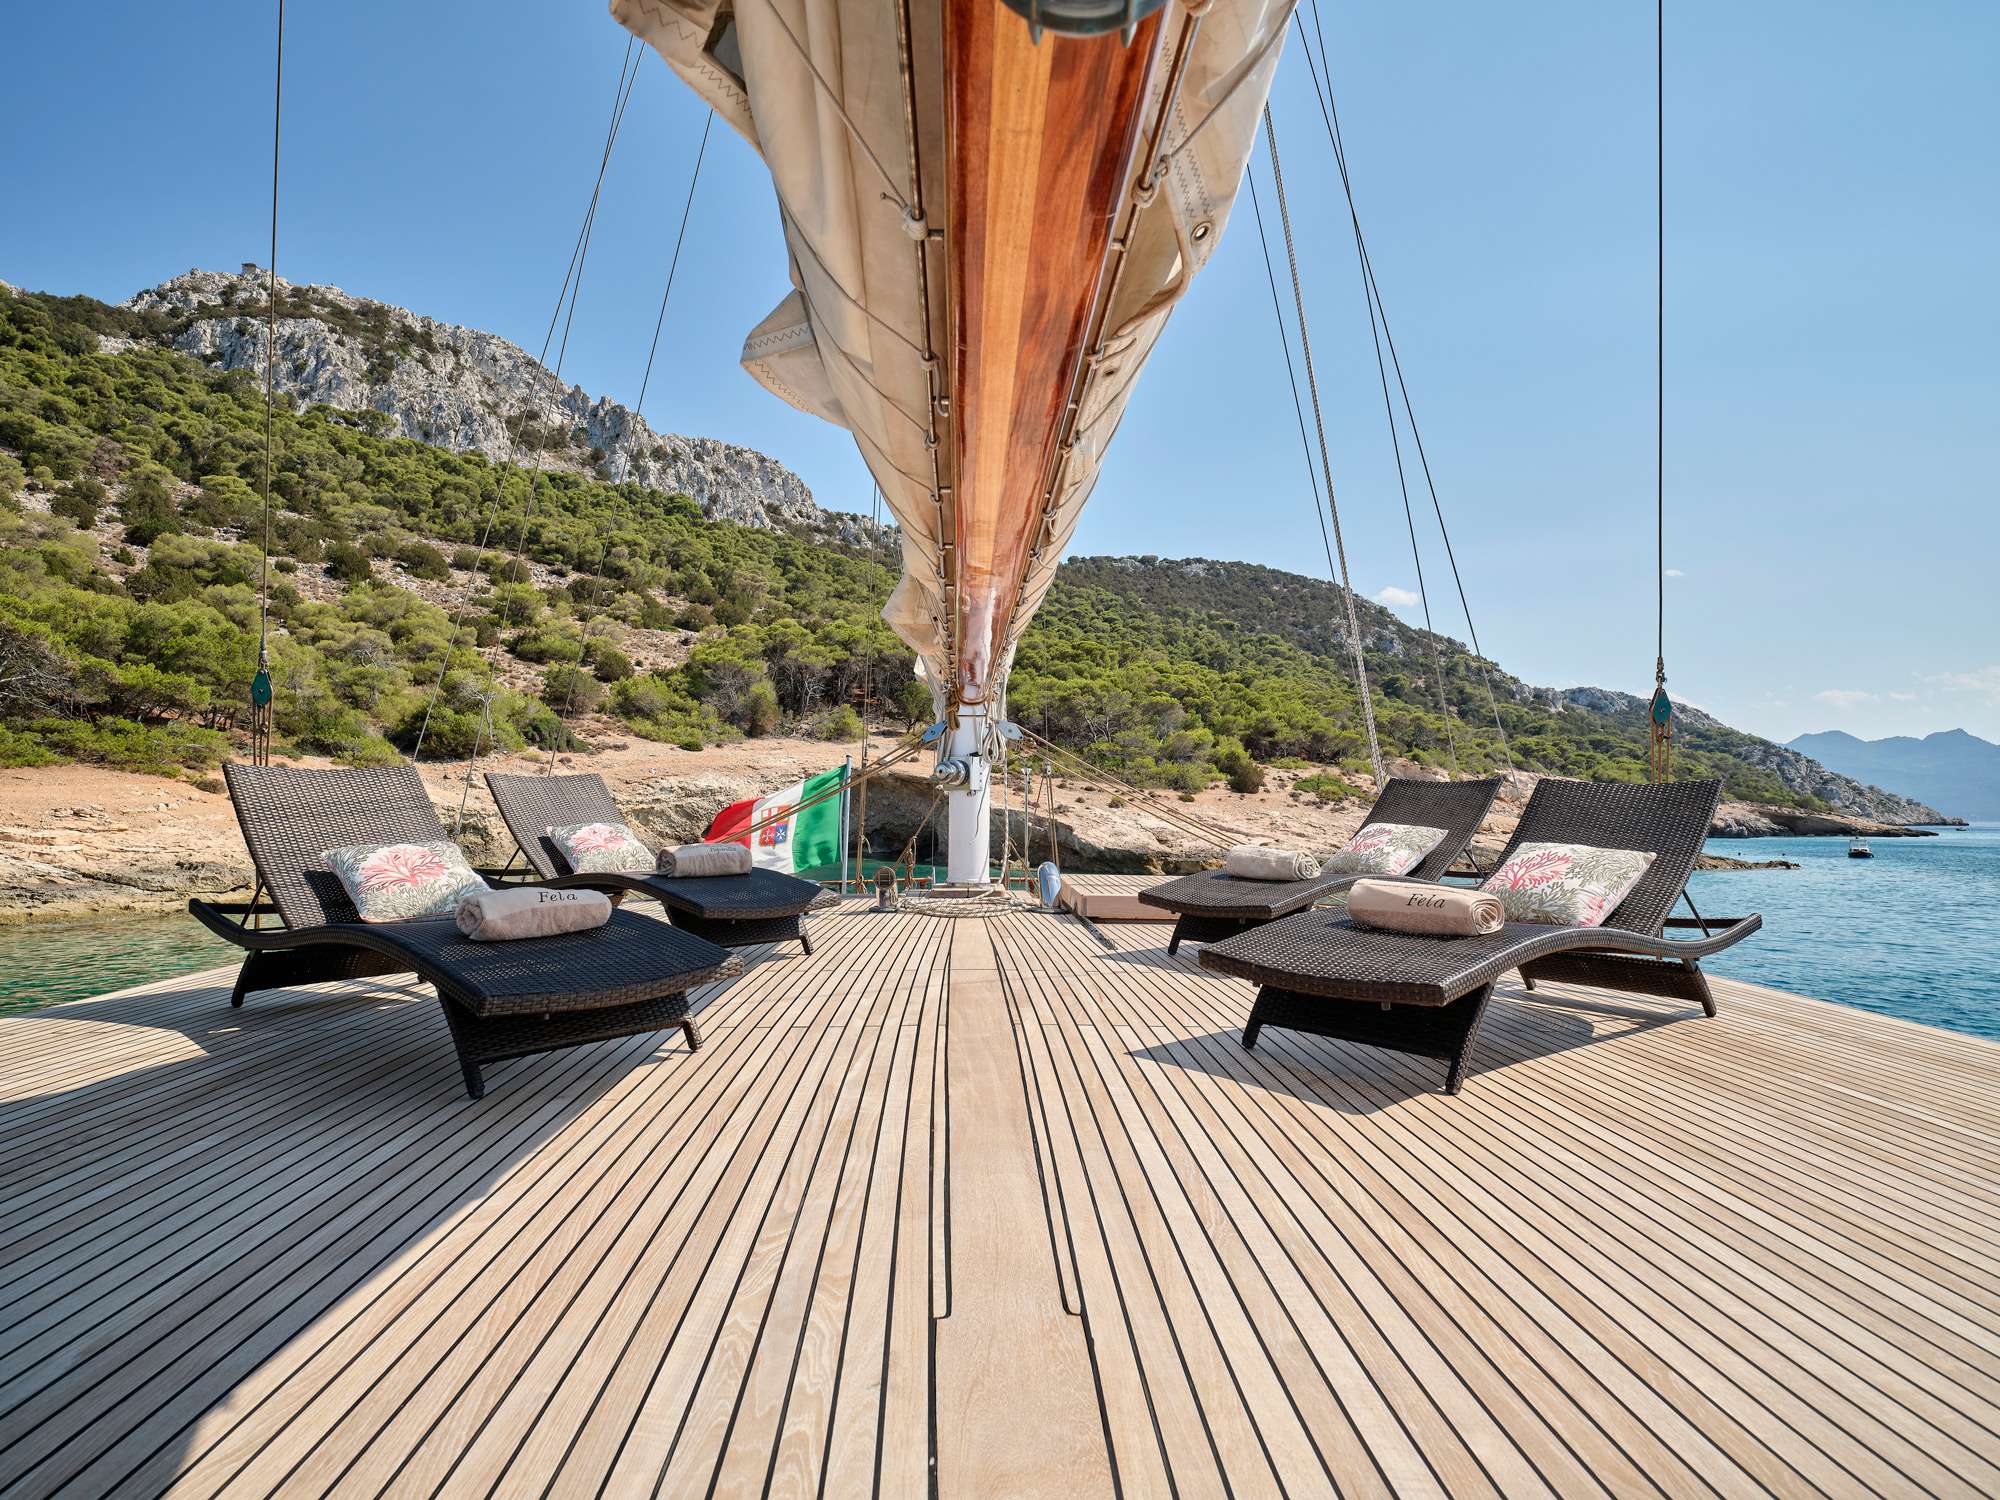 Motor sailing yacht charter Greece. Yacht hire Greek islands. Private sailing yacht cruises in Greece, Mediterranean.